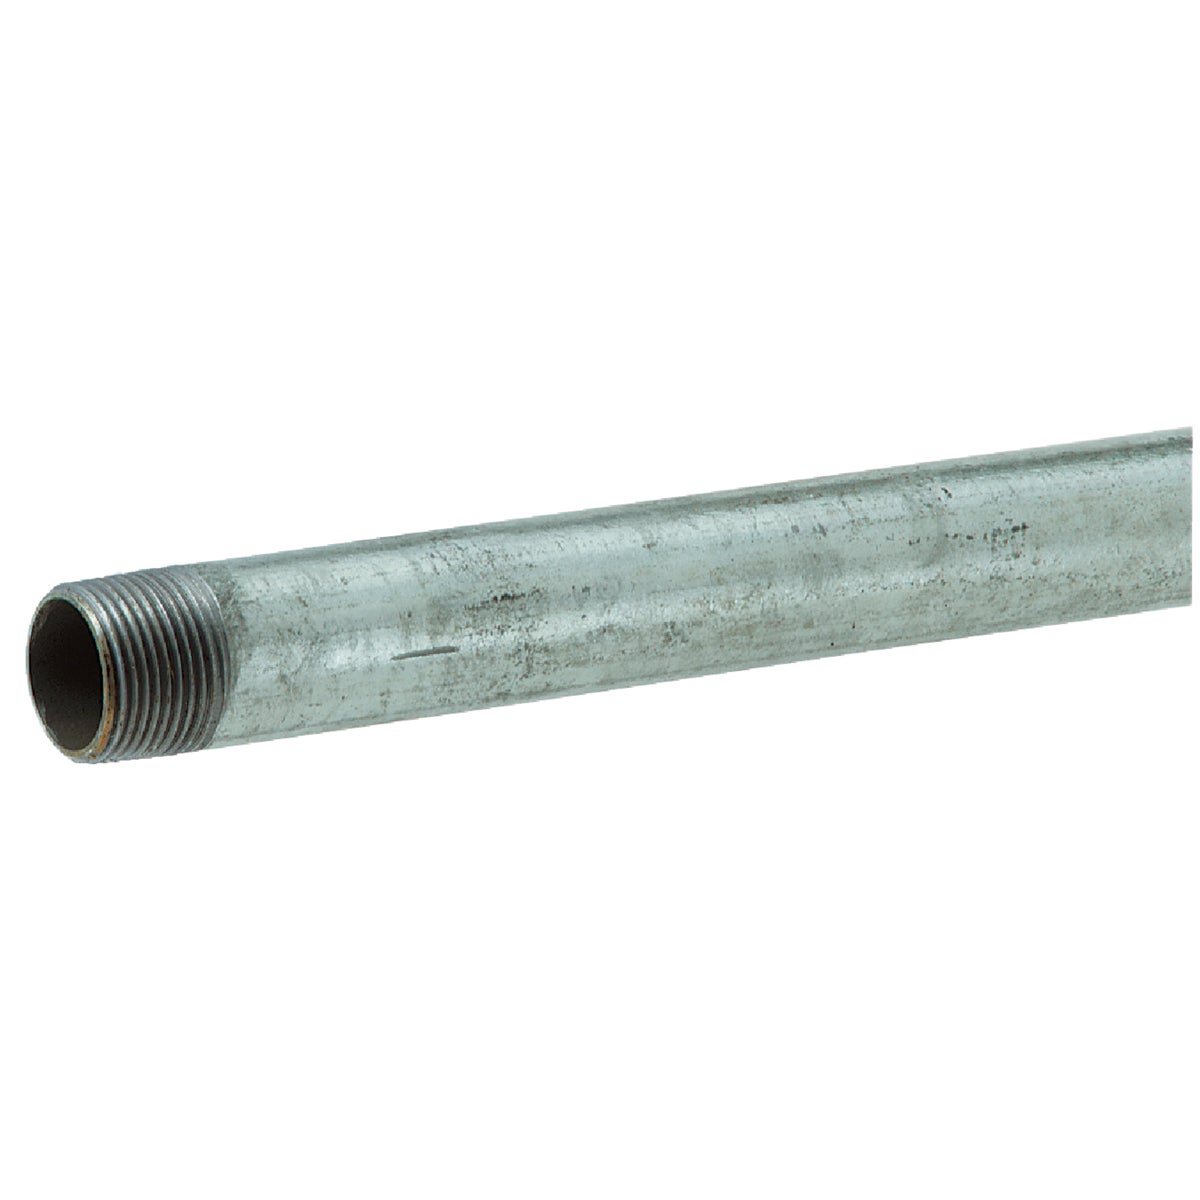 Southland 3/4 In. x 30 In. Carbon Steel Threaded Galvanized Pipe